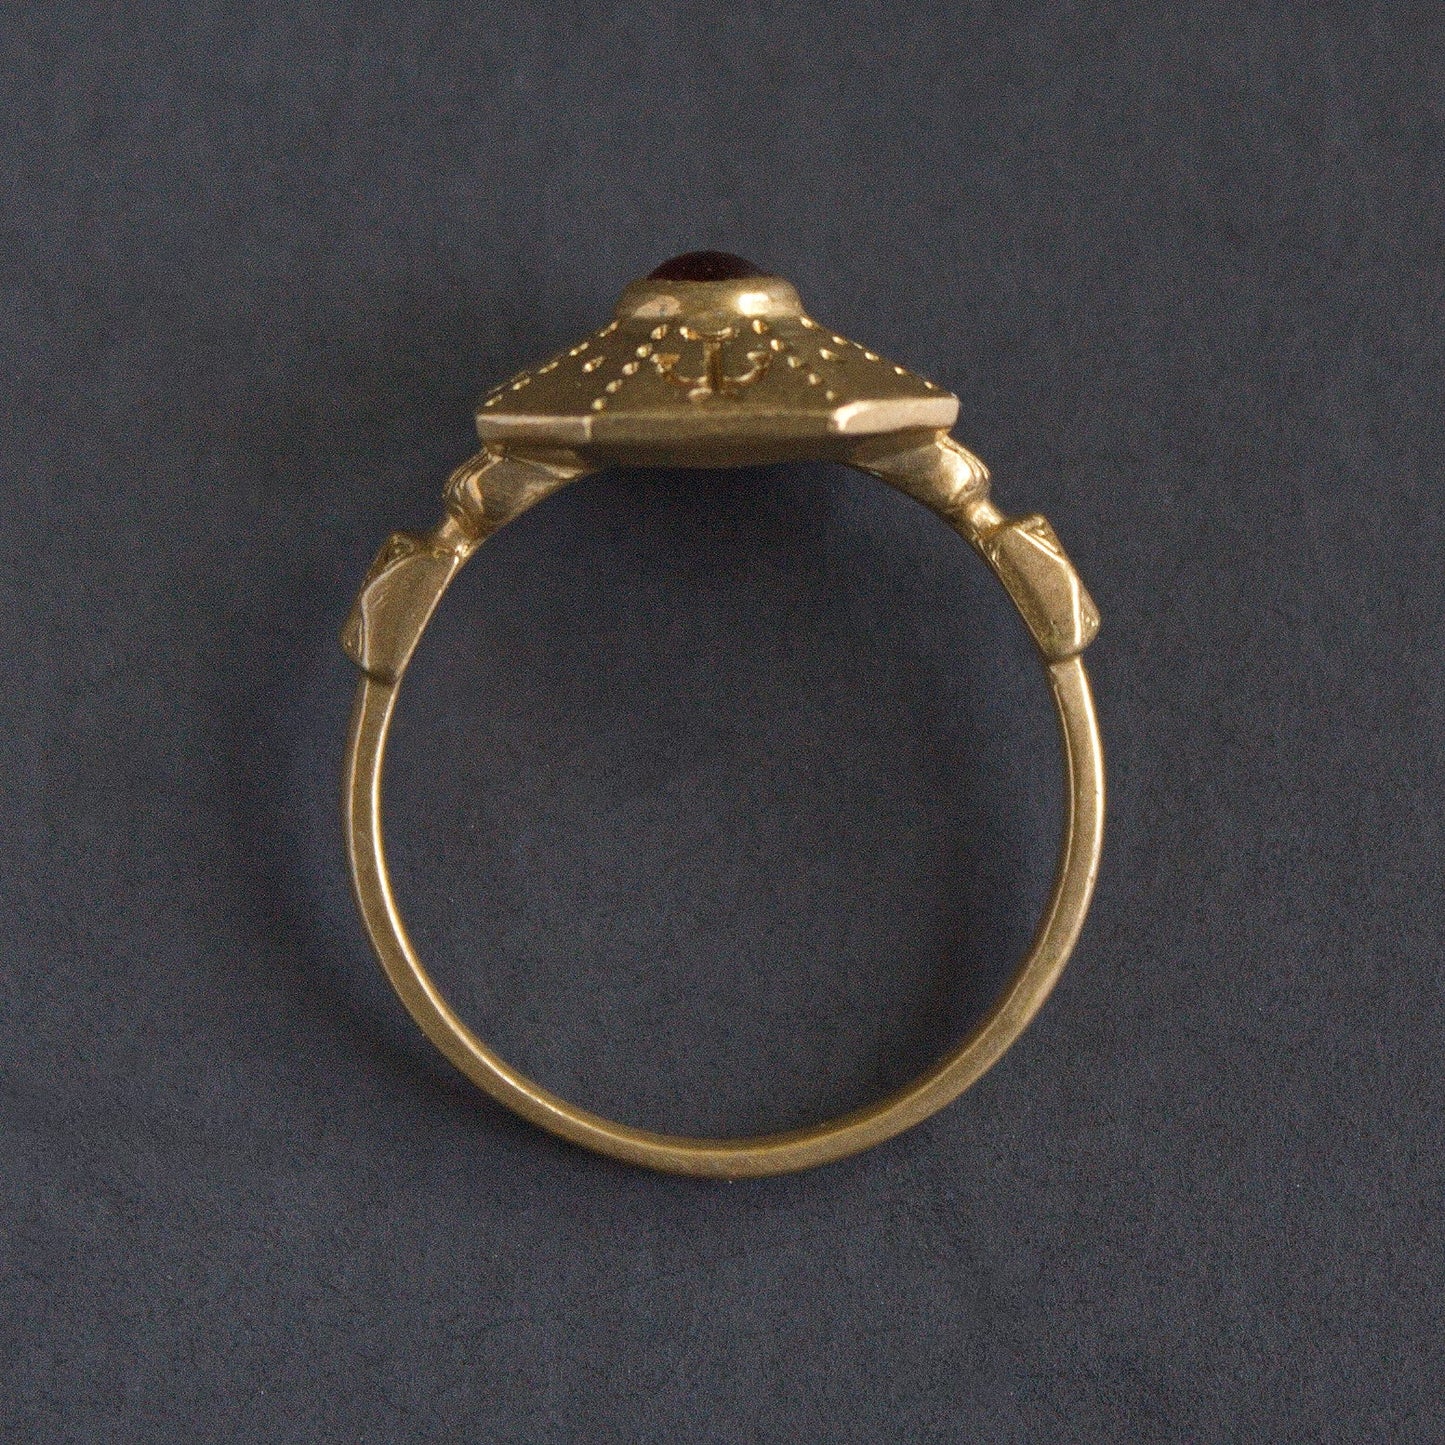 13th Century Octagonal Ring with Anchor Motifs